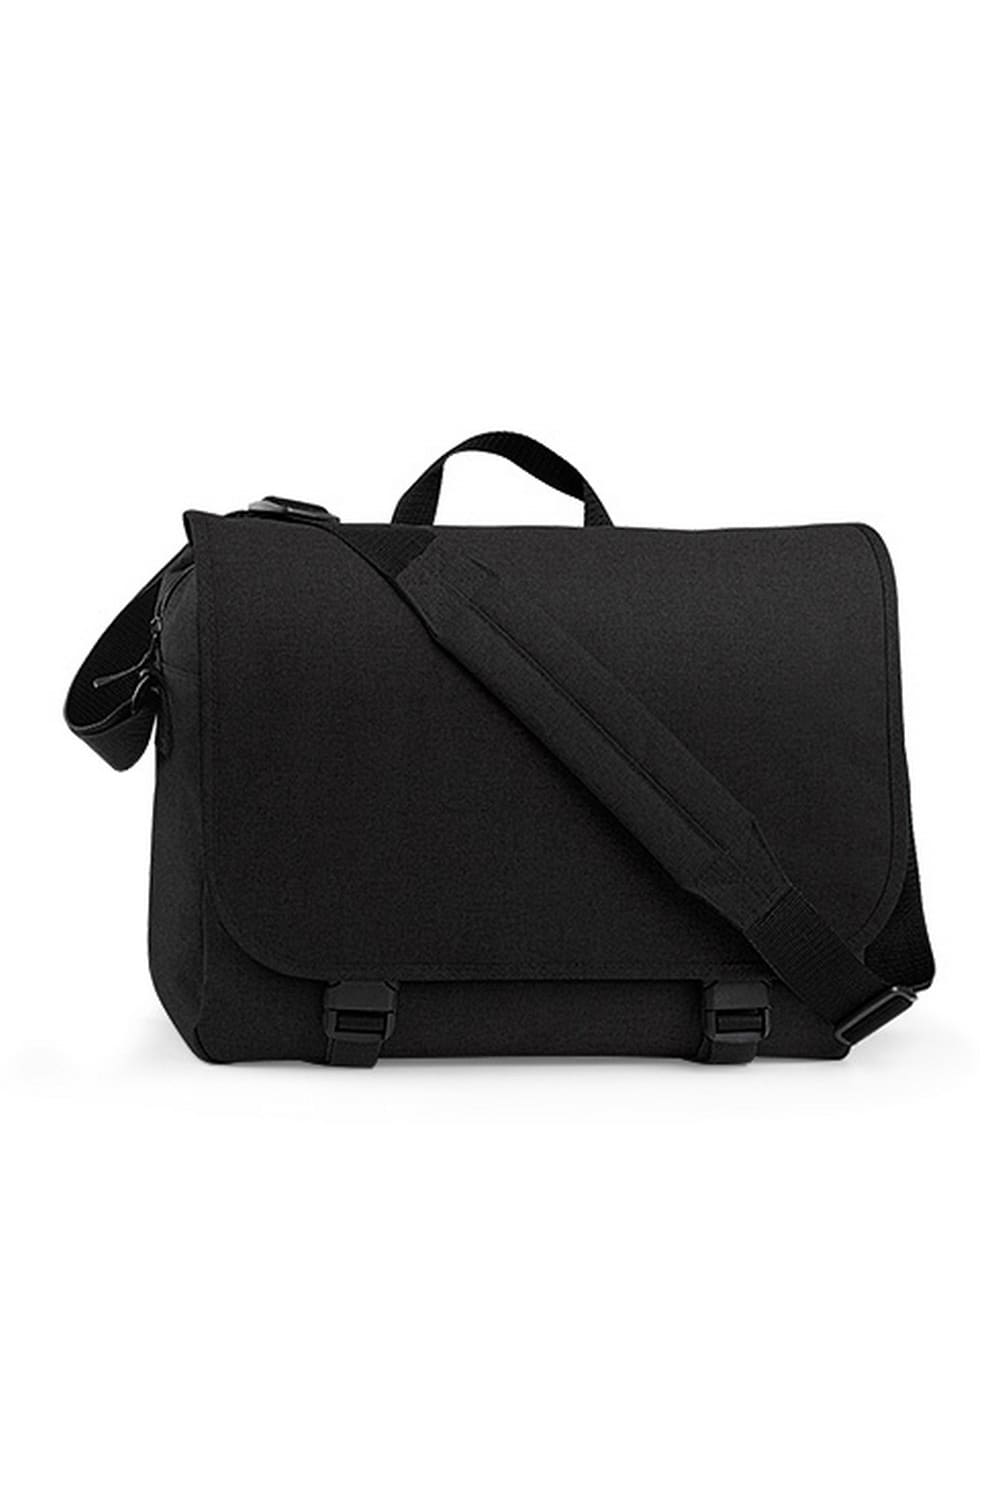 BagBase Two-tone Digital Messenger Bag (Up To 15.6inch Laptop Compartment) (Black) (One Size)